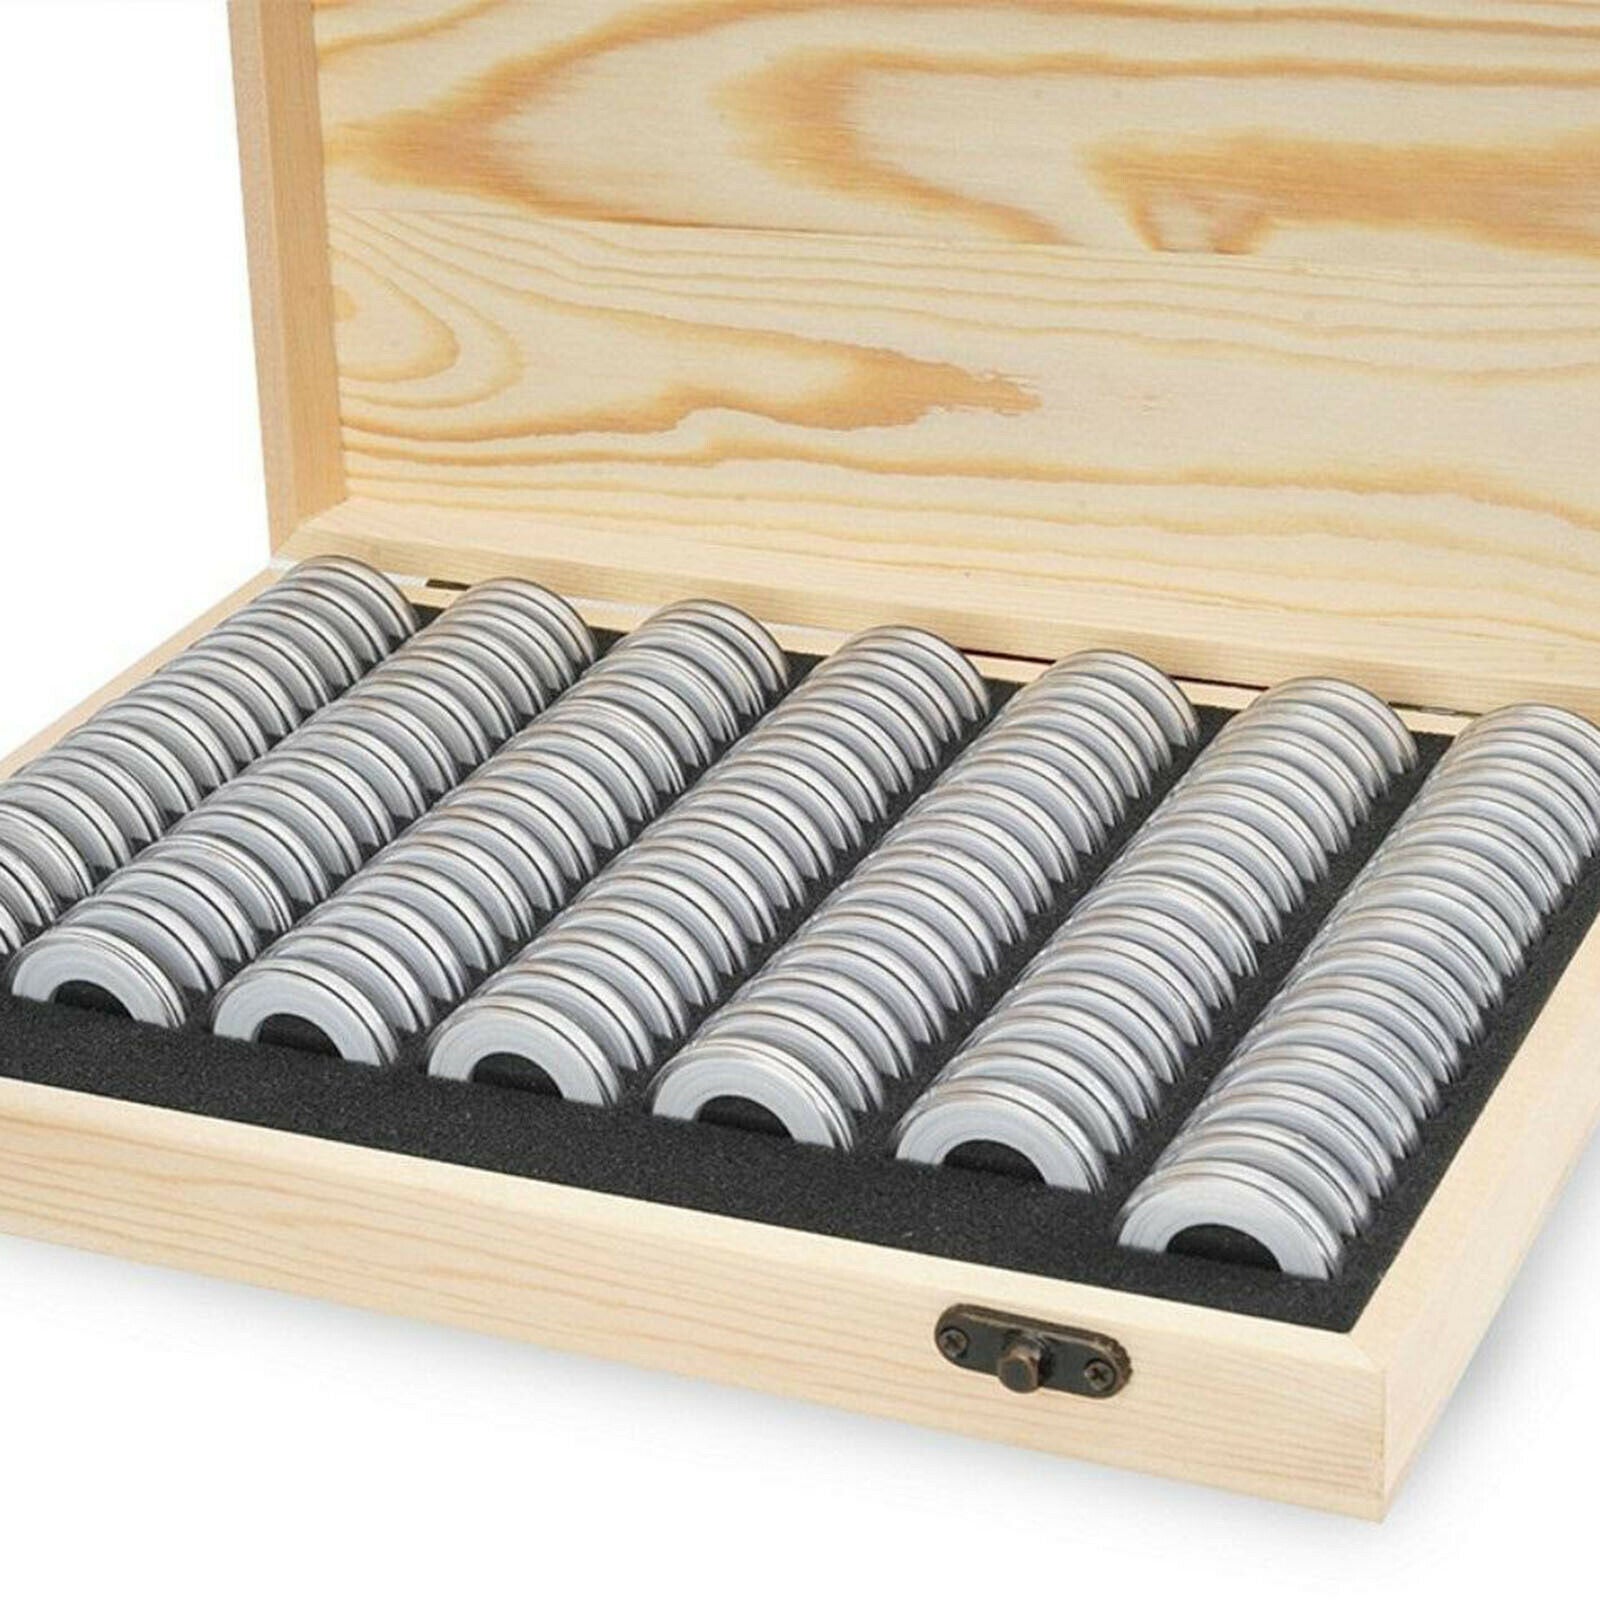 100x Coin Capsules with Foam Gasket Holder Wooden Box Coin Collection Supplies